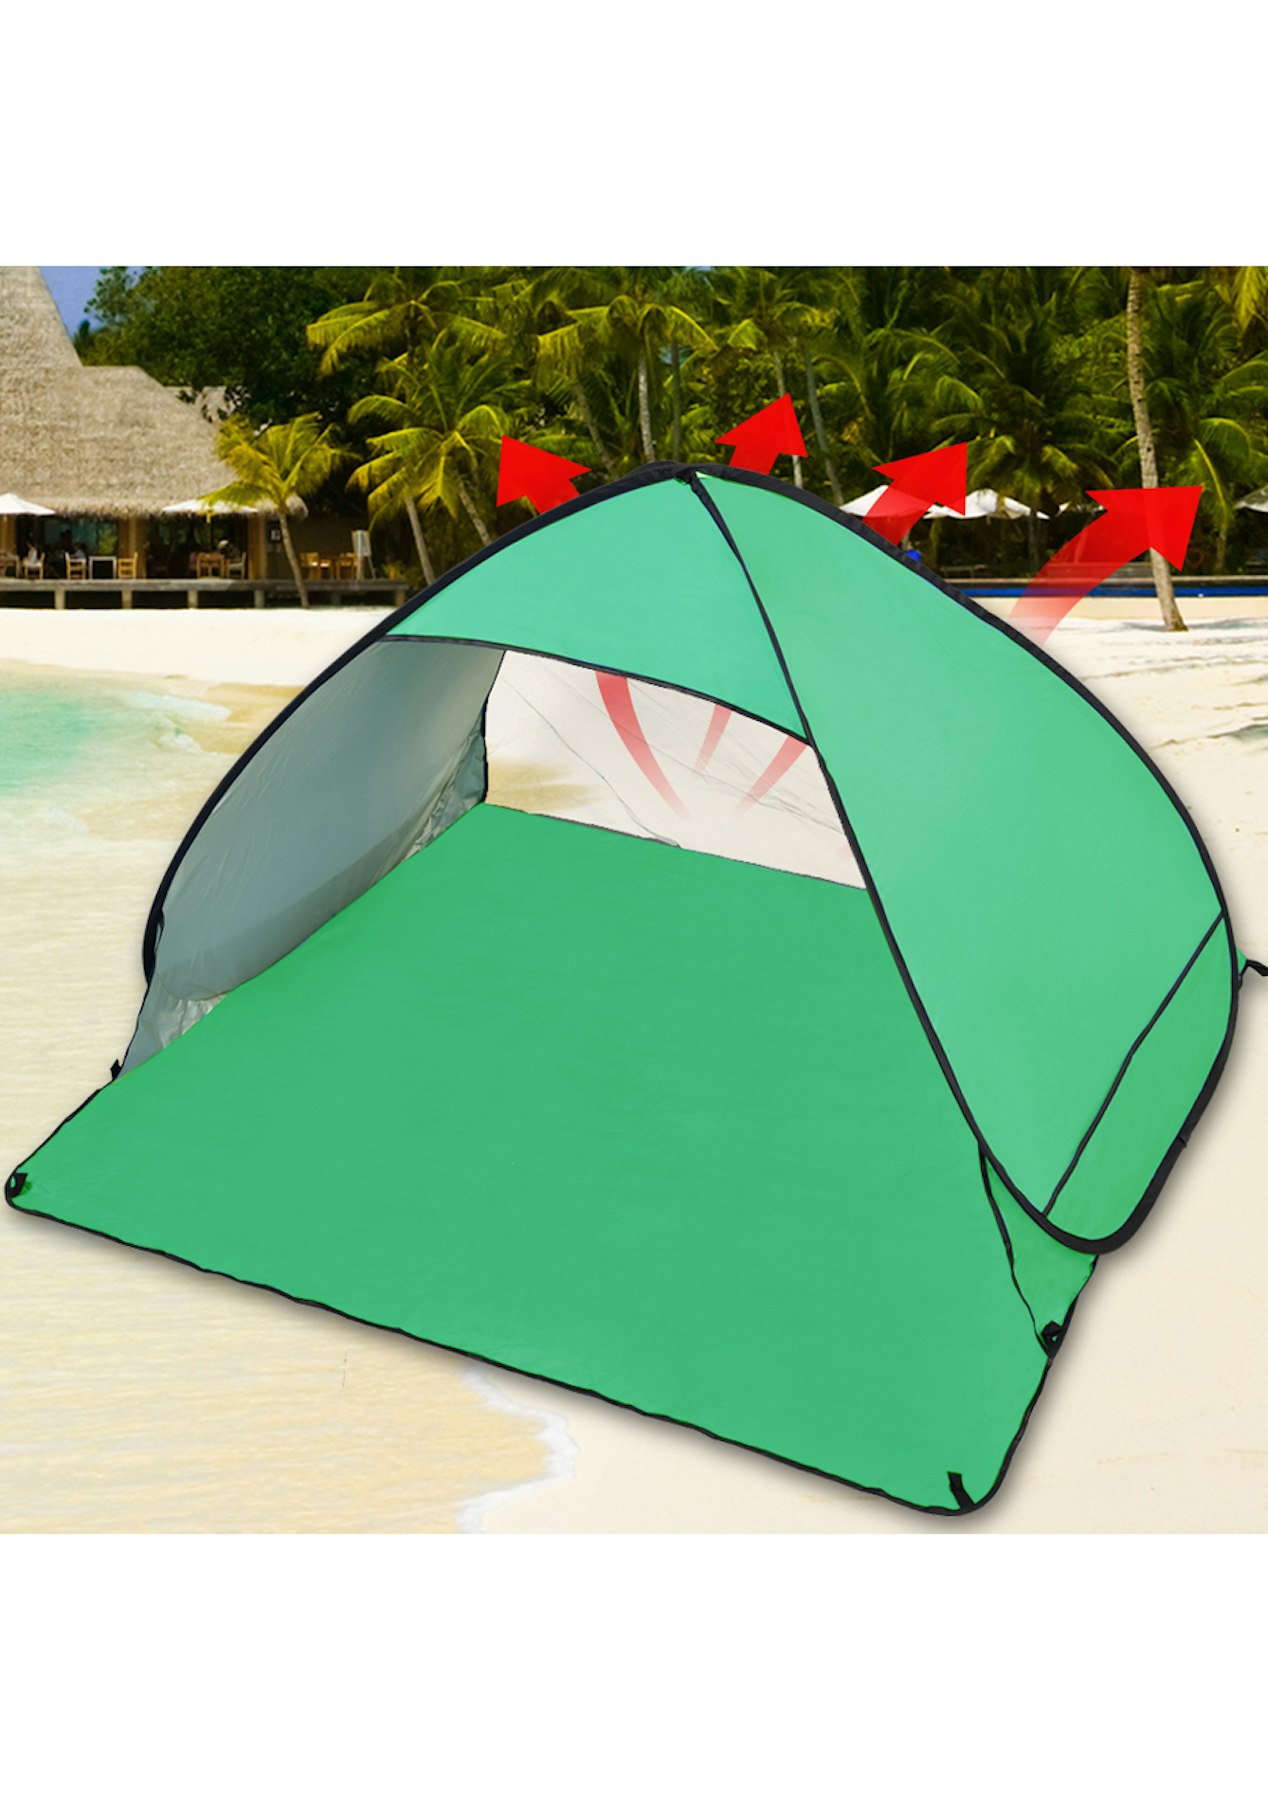 2 Person Pop Up Beach Shelter in Green Colour - Onceit